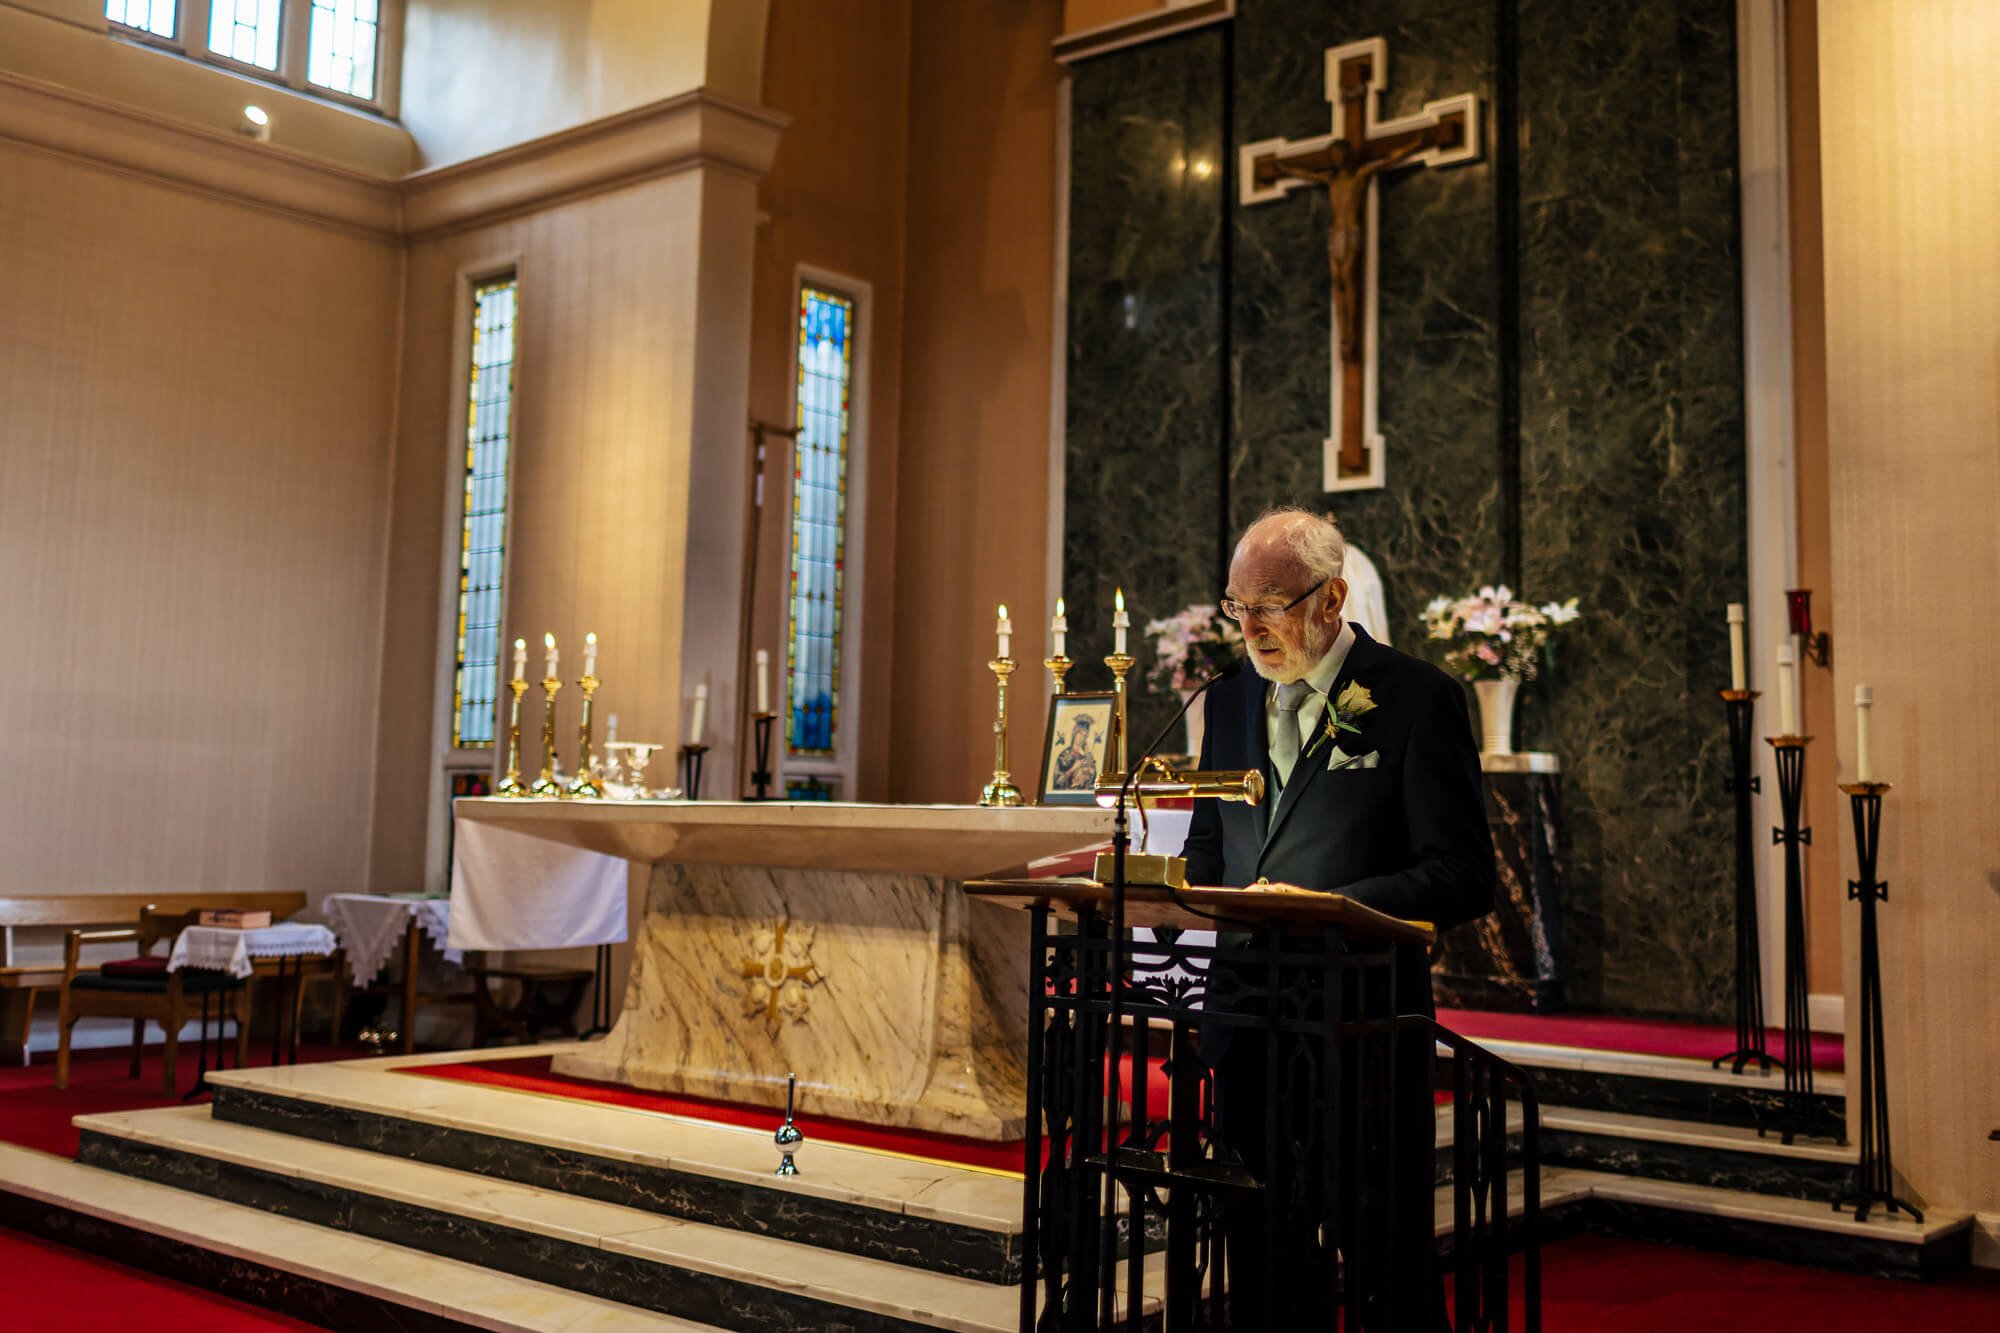 Groom's dad performs a reading at the church ceremony